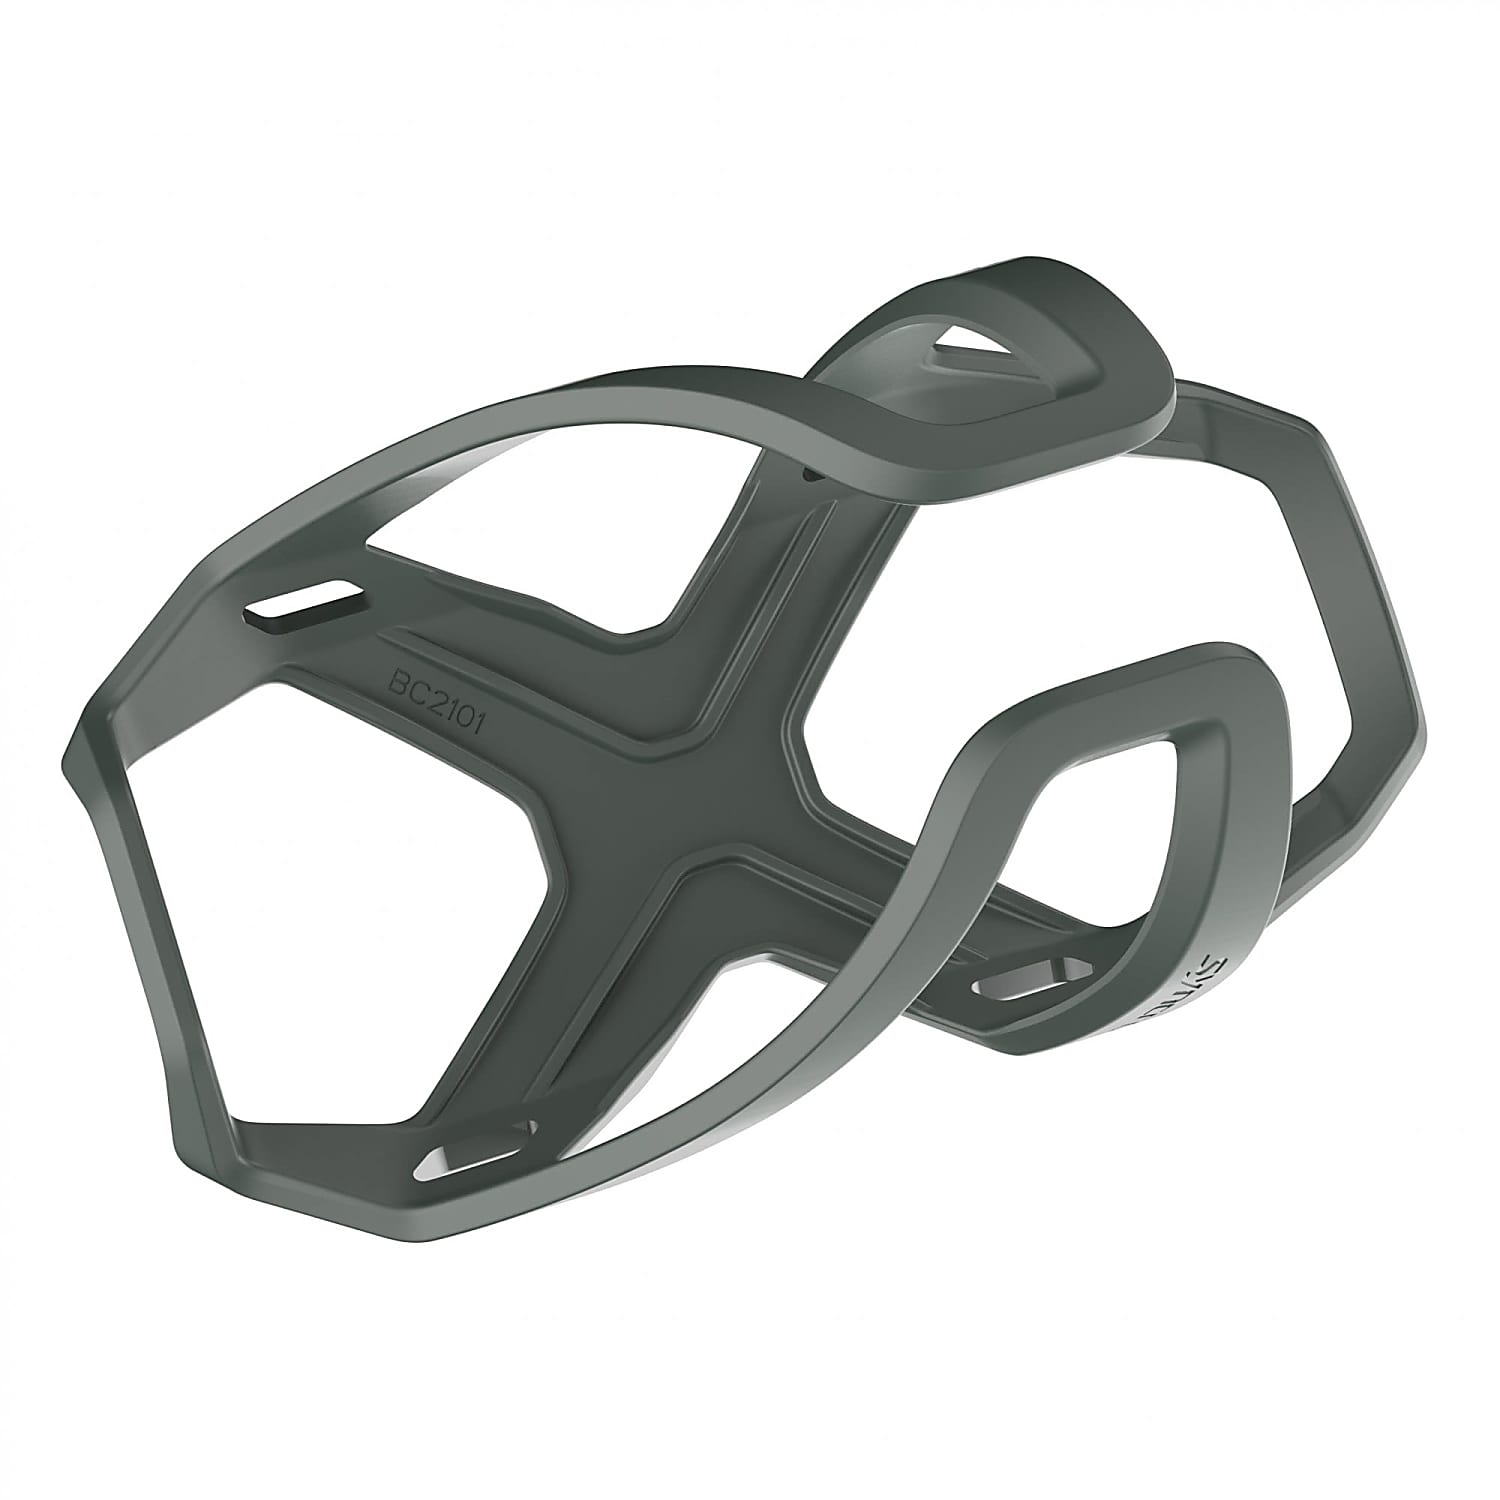 syncros bottle cage